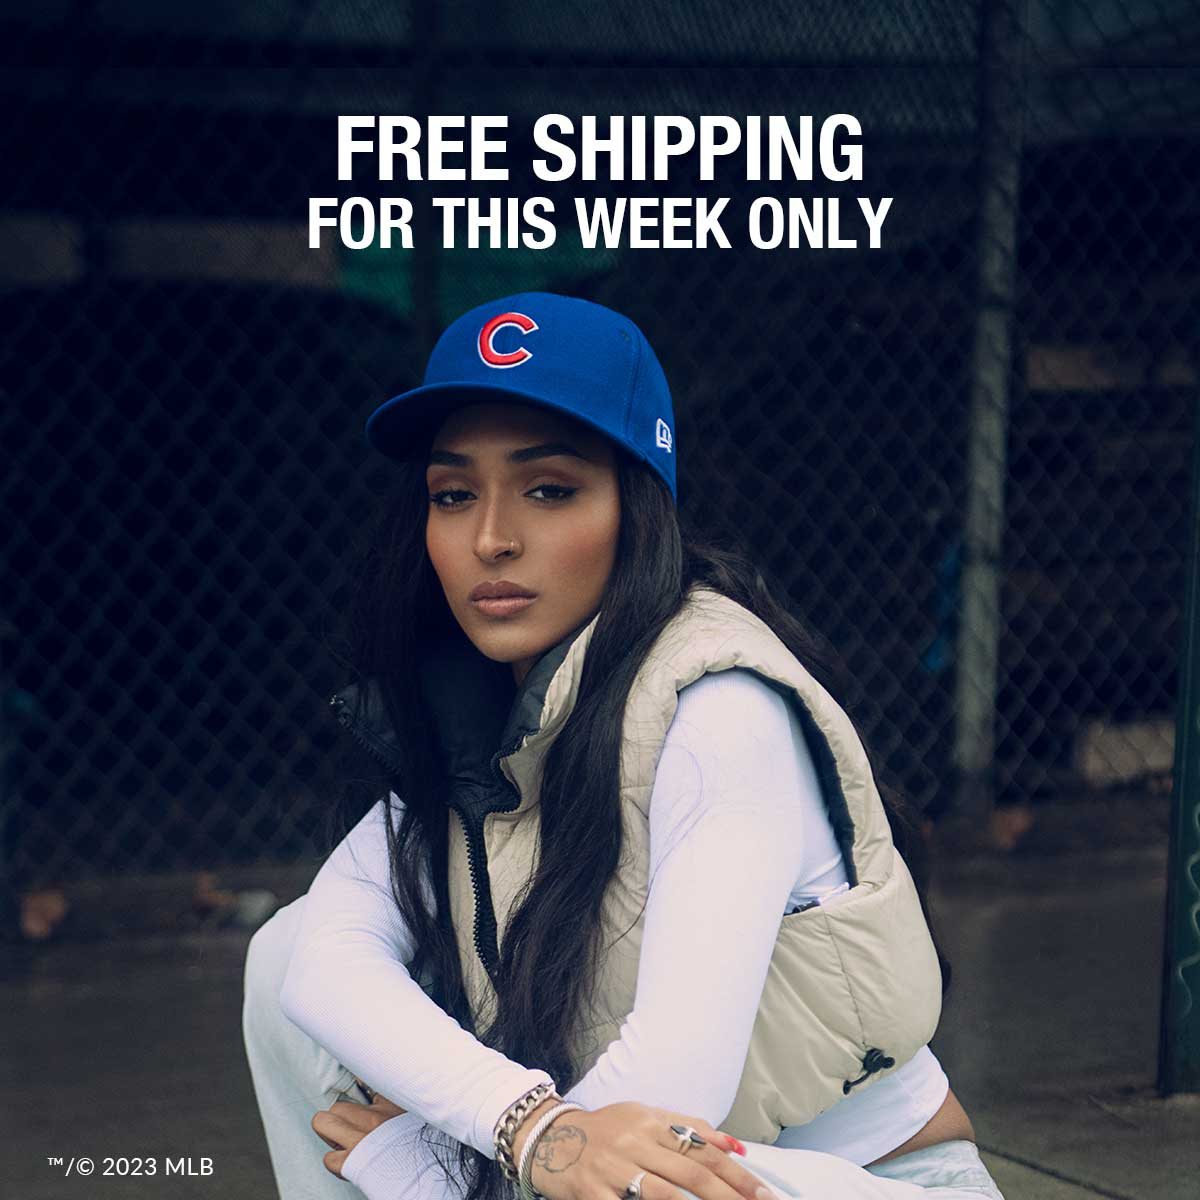 Free Shipping for this week only